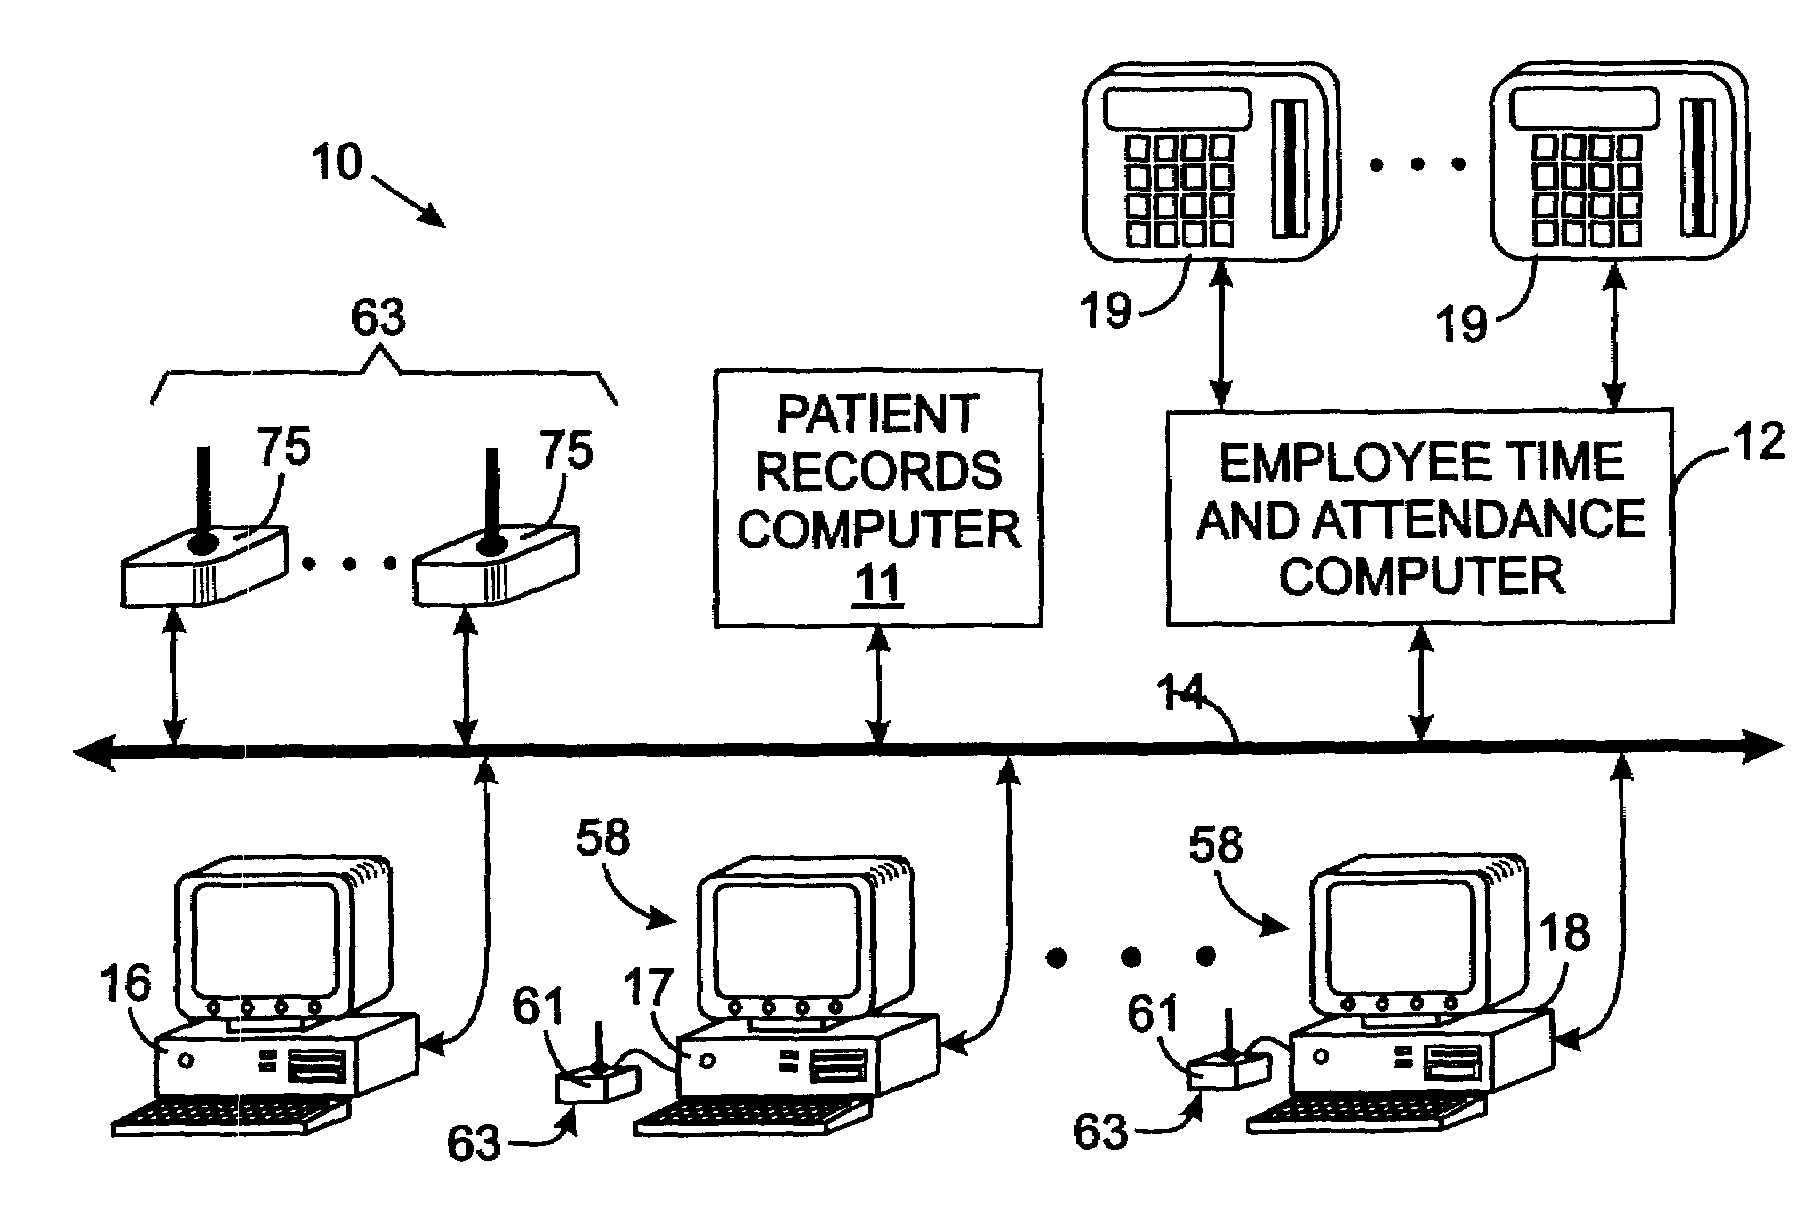 System for monitoring patient supervision by health-care workers